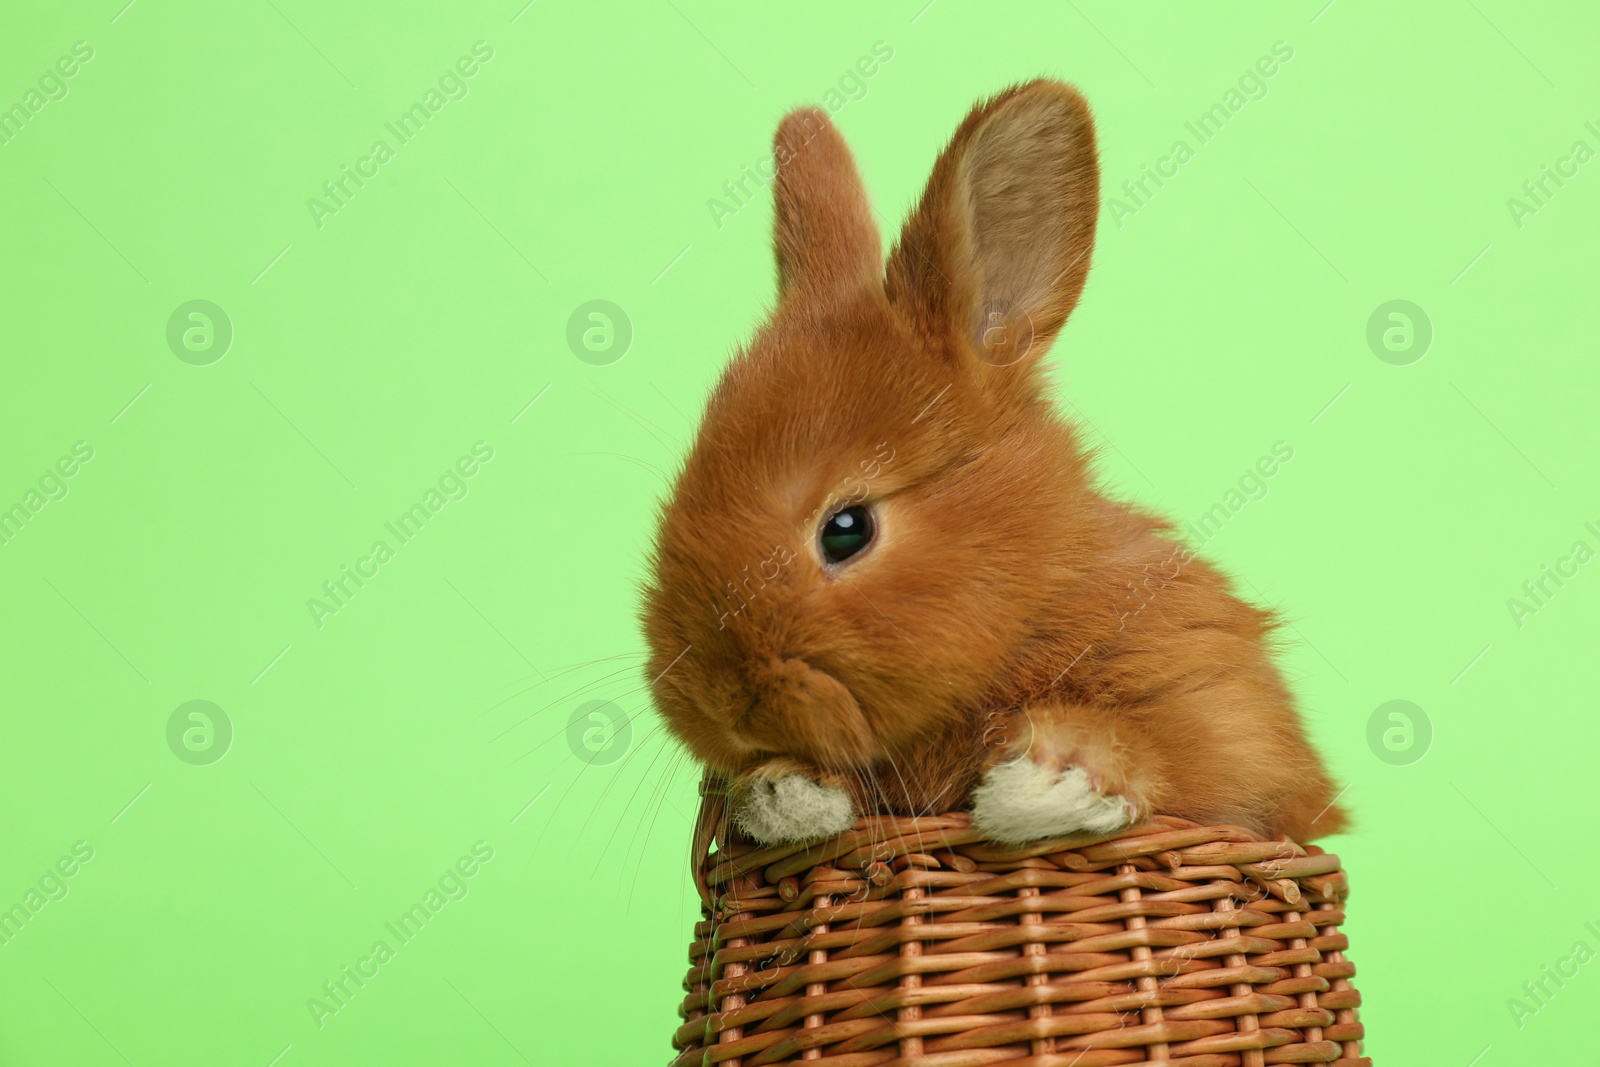 Photo of Adorable fluffy bunny in wicker basket on green background, closeup. Easter symbol